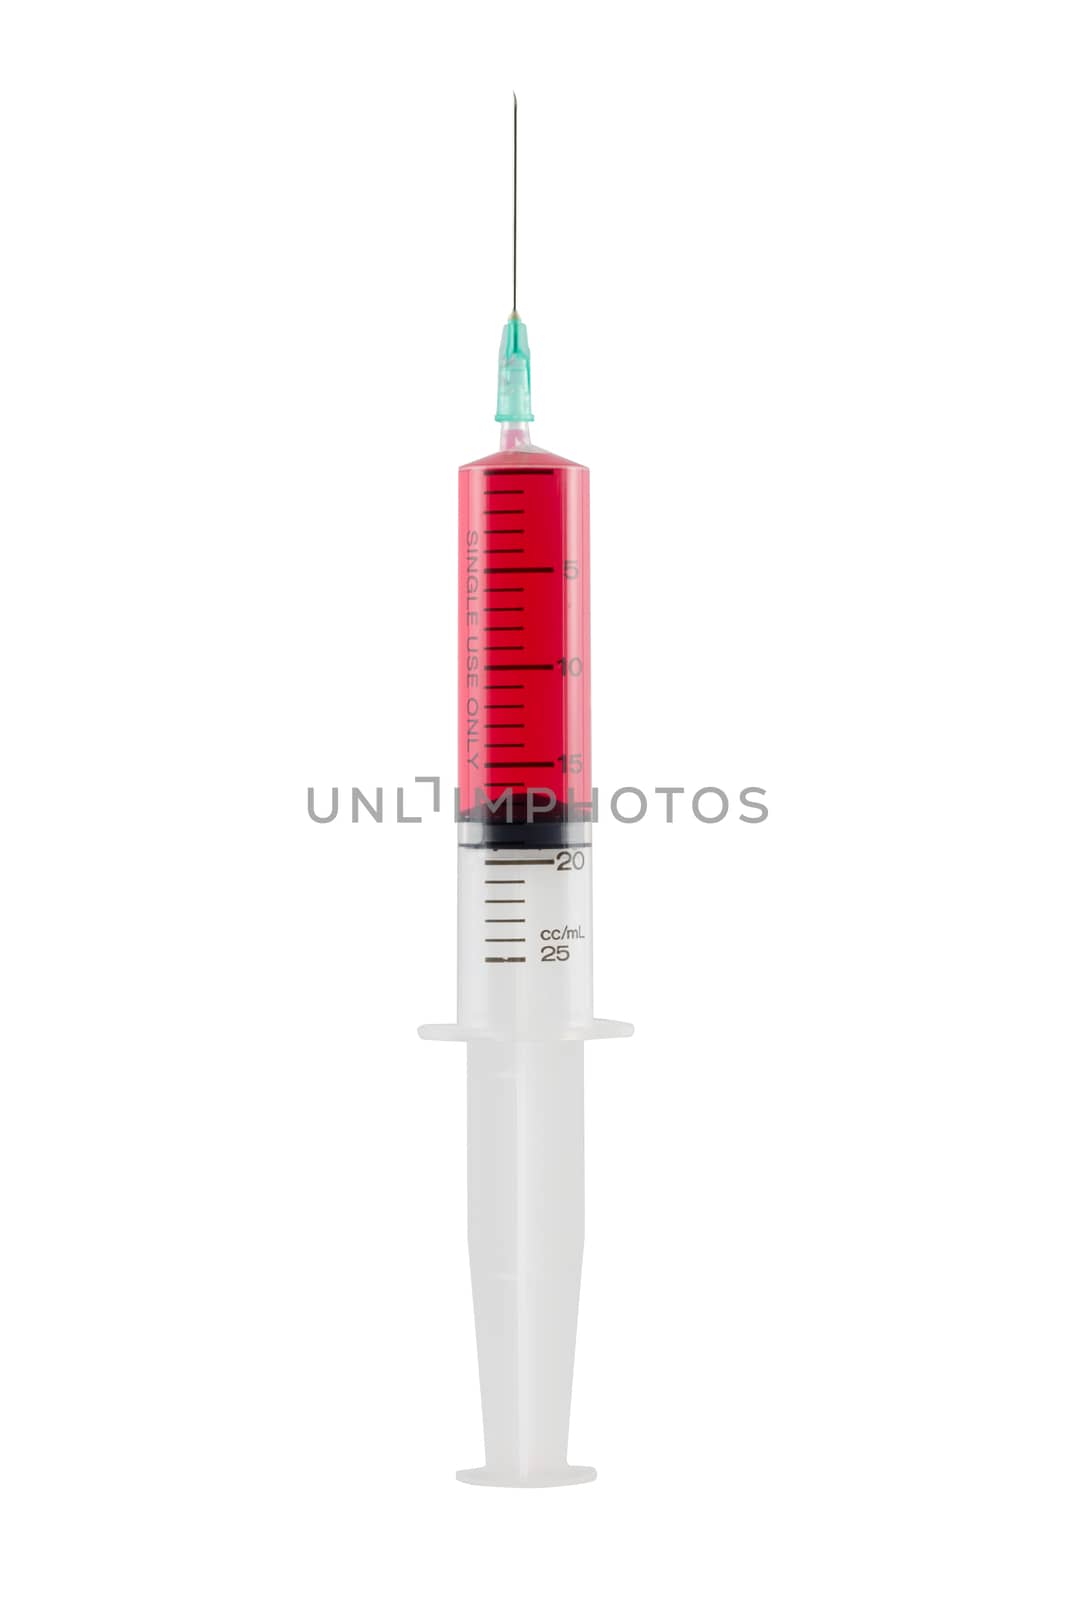 Syringe fill red blood isolated white background.